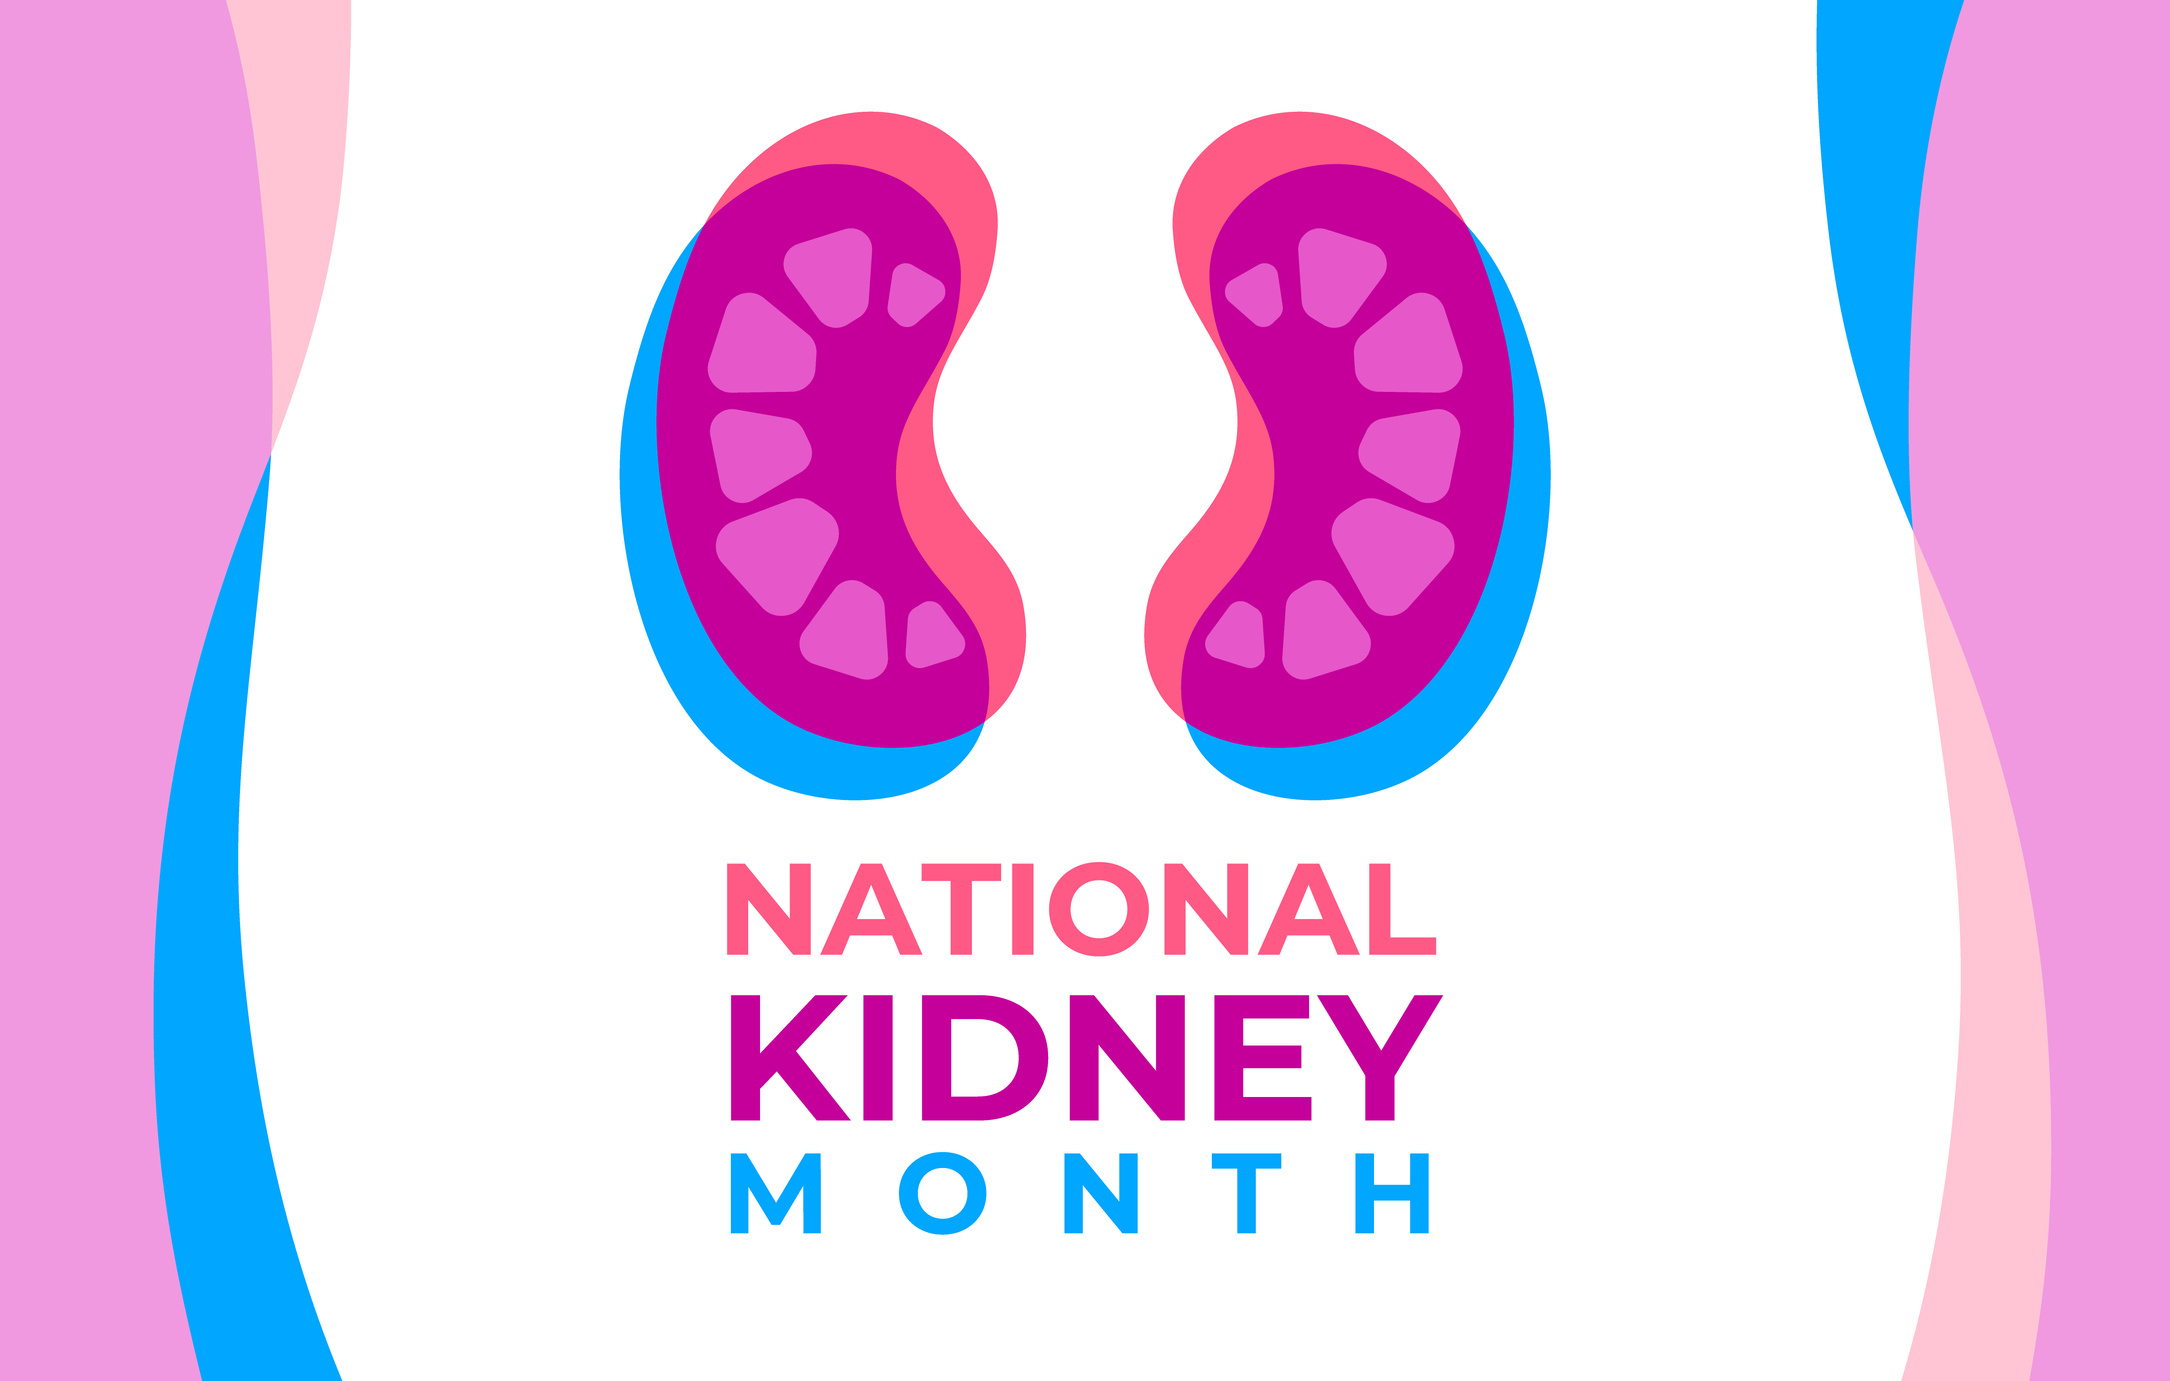 March is National Kidney Month! Dialysis Patient Citizens Education